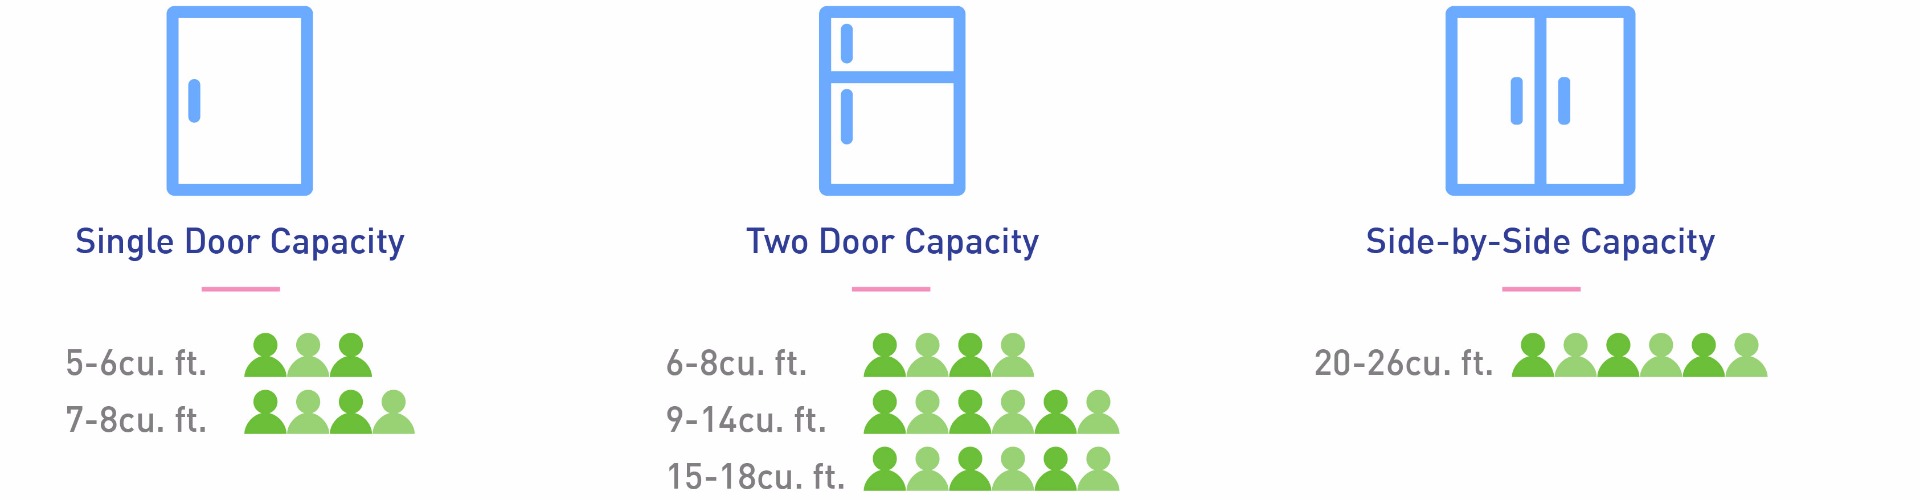 ref size capacity guide